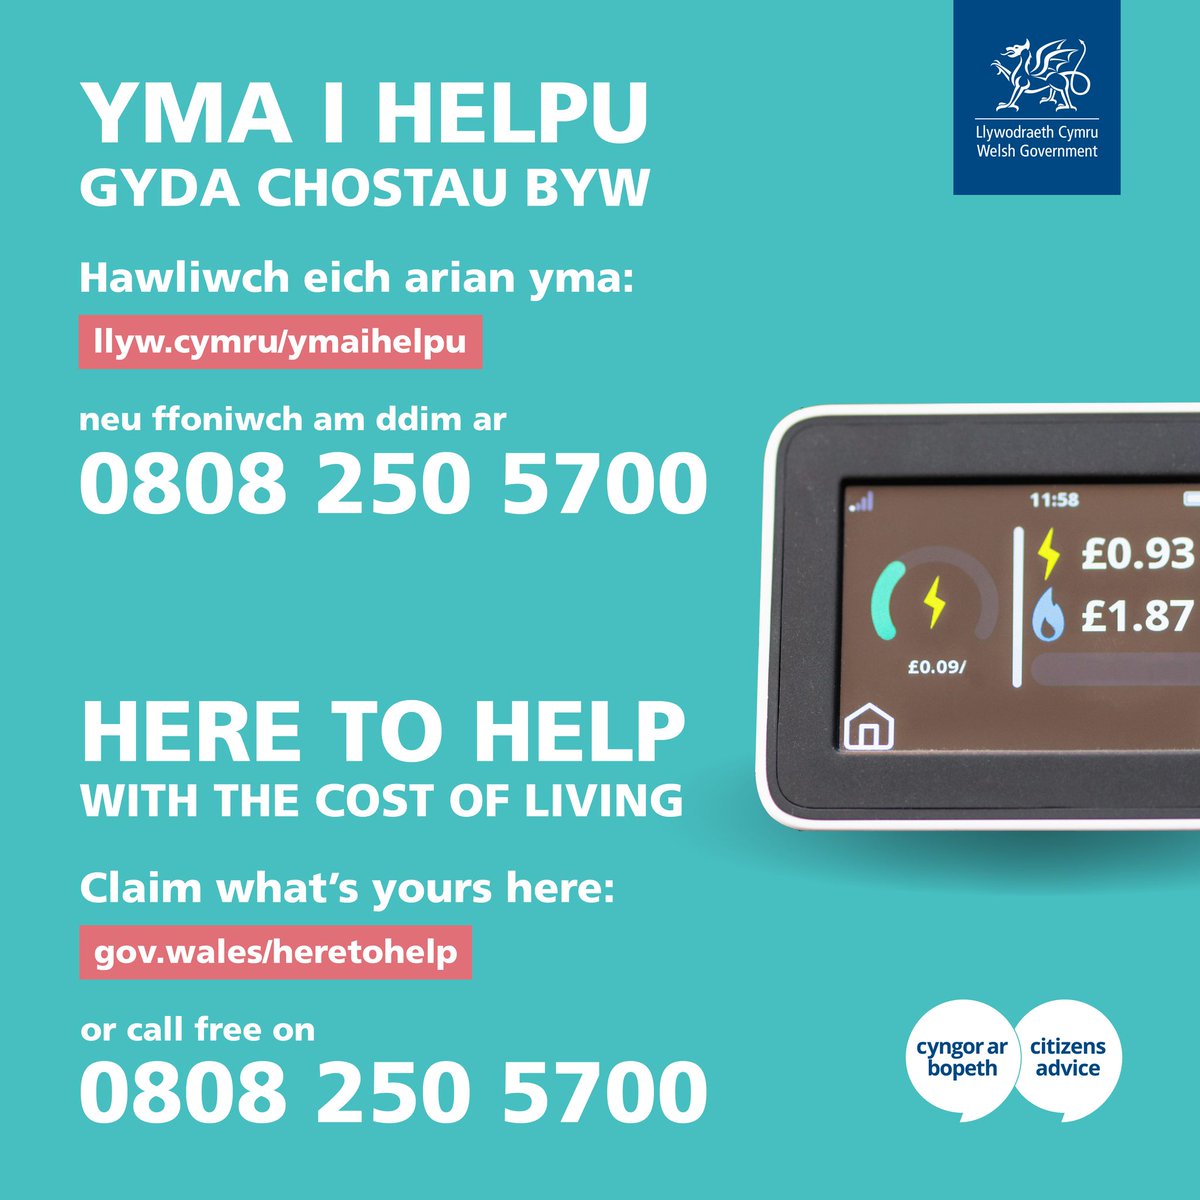 The rising cost of living is a worry to a lot of people in Wales. The Welsh Government has support available. To find out more about the support available visit: gov.wales/heretohelp or call Advicelink Cymru for free today on 0808 250 5700 to claim what’s yours. #HereToHelp